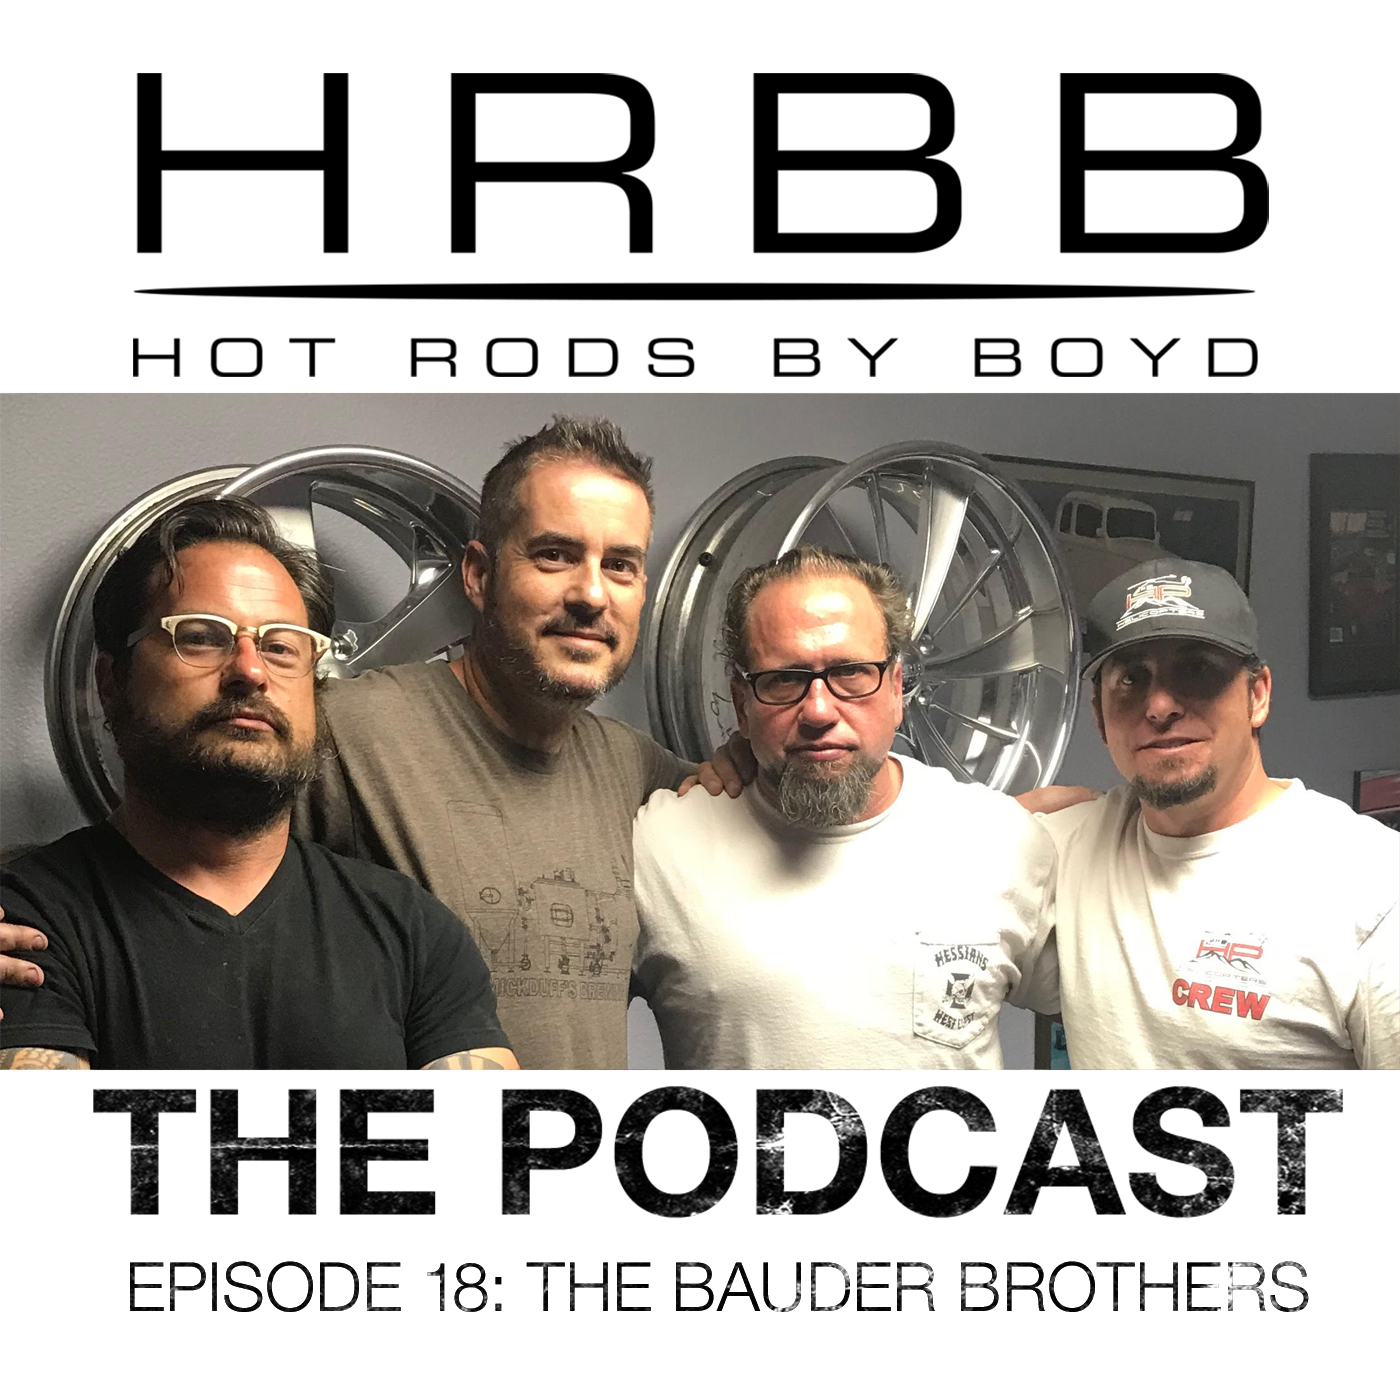 HRBB Podcast Ep18 - The Bauder Brothers